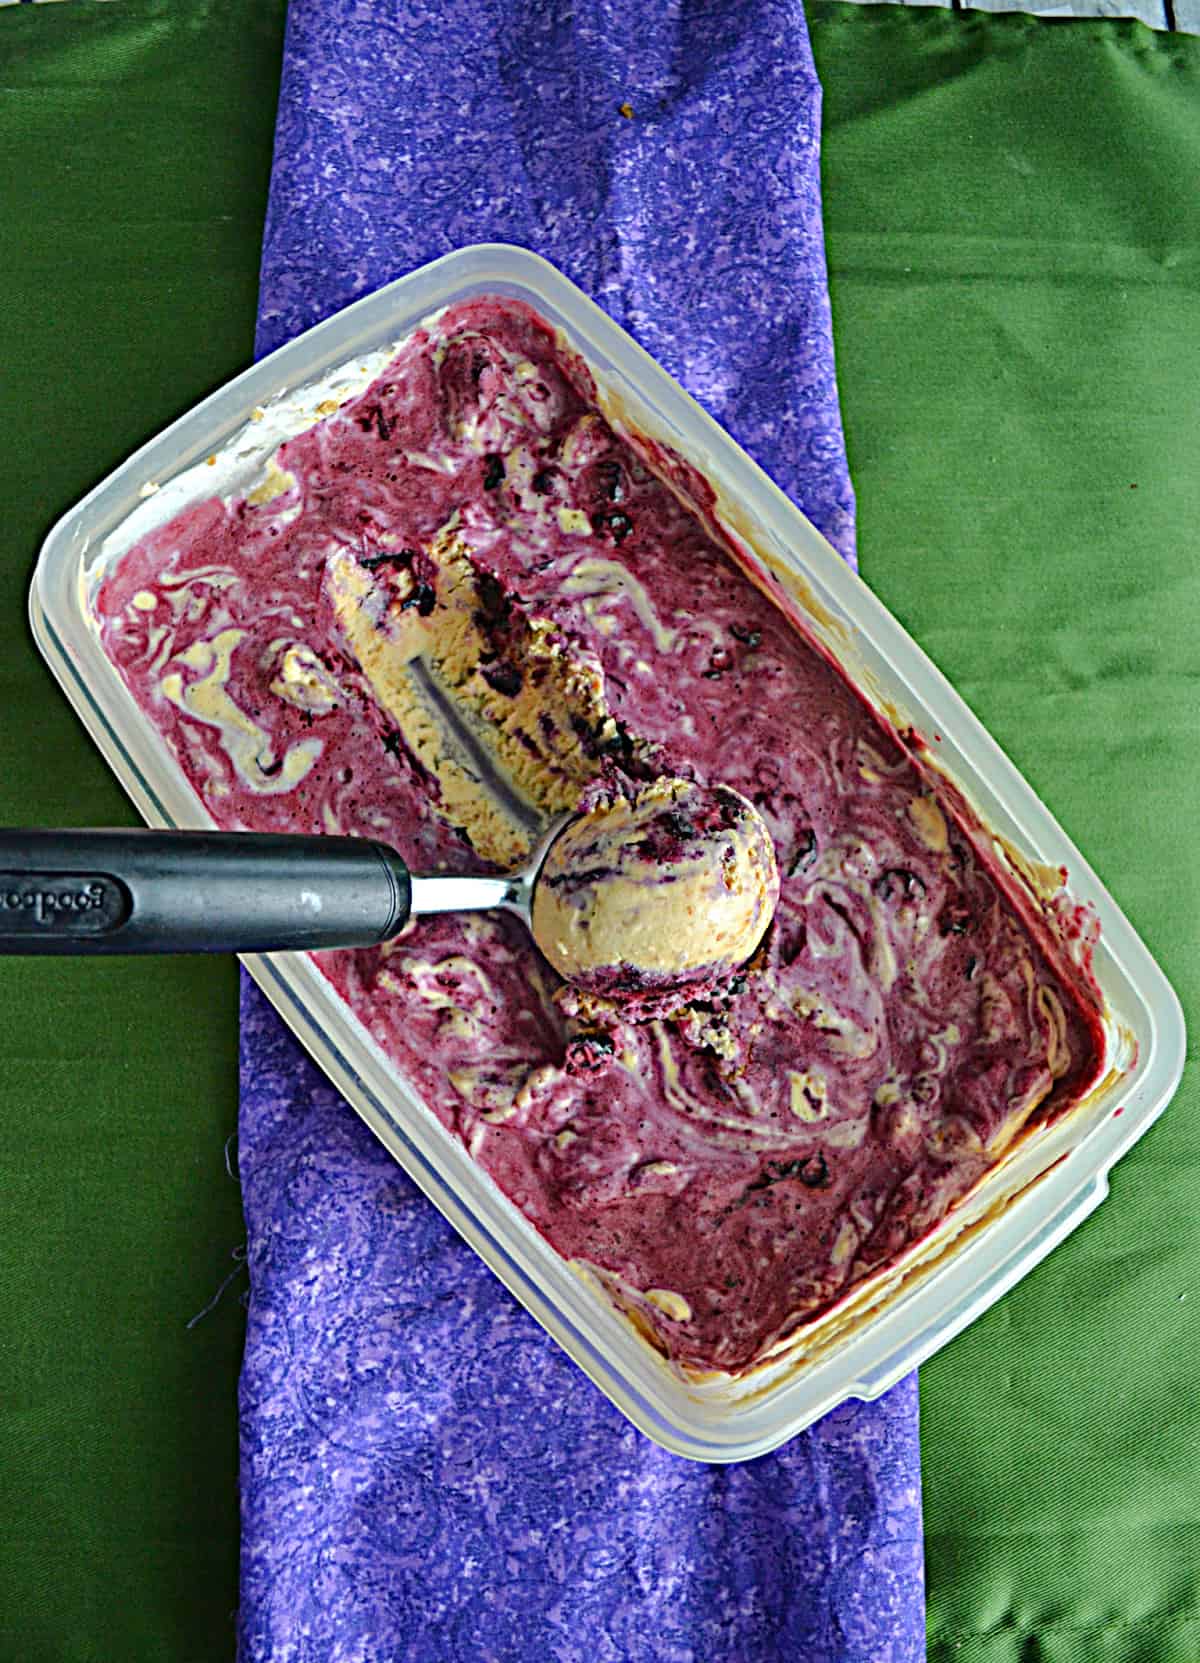 A container of blueberry ice cream with an ice cream scoop in it.